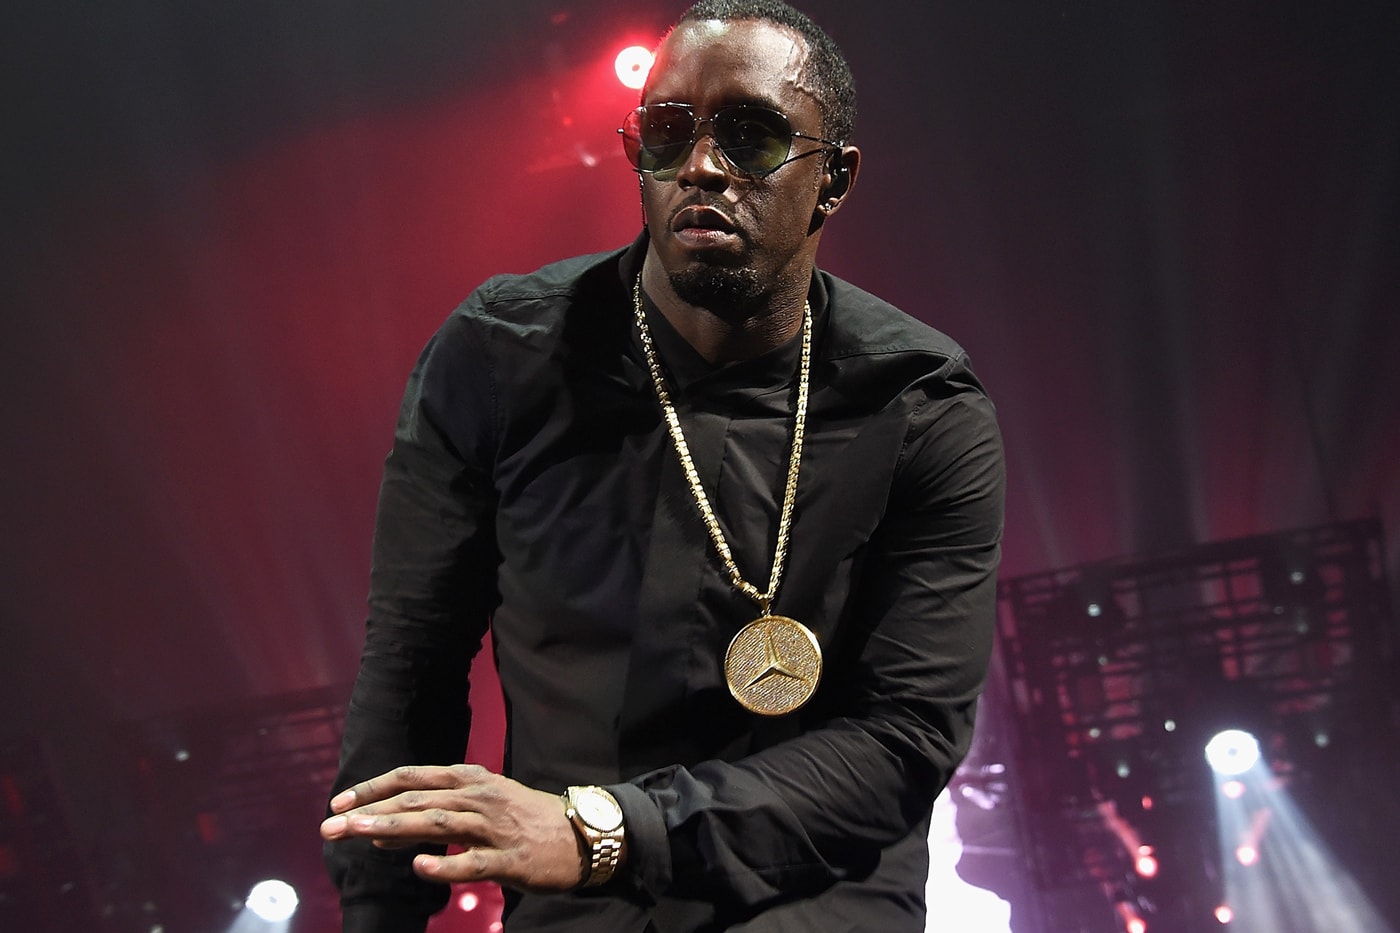 puff-daddy-launches-charter-school-in-harlem